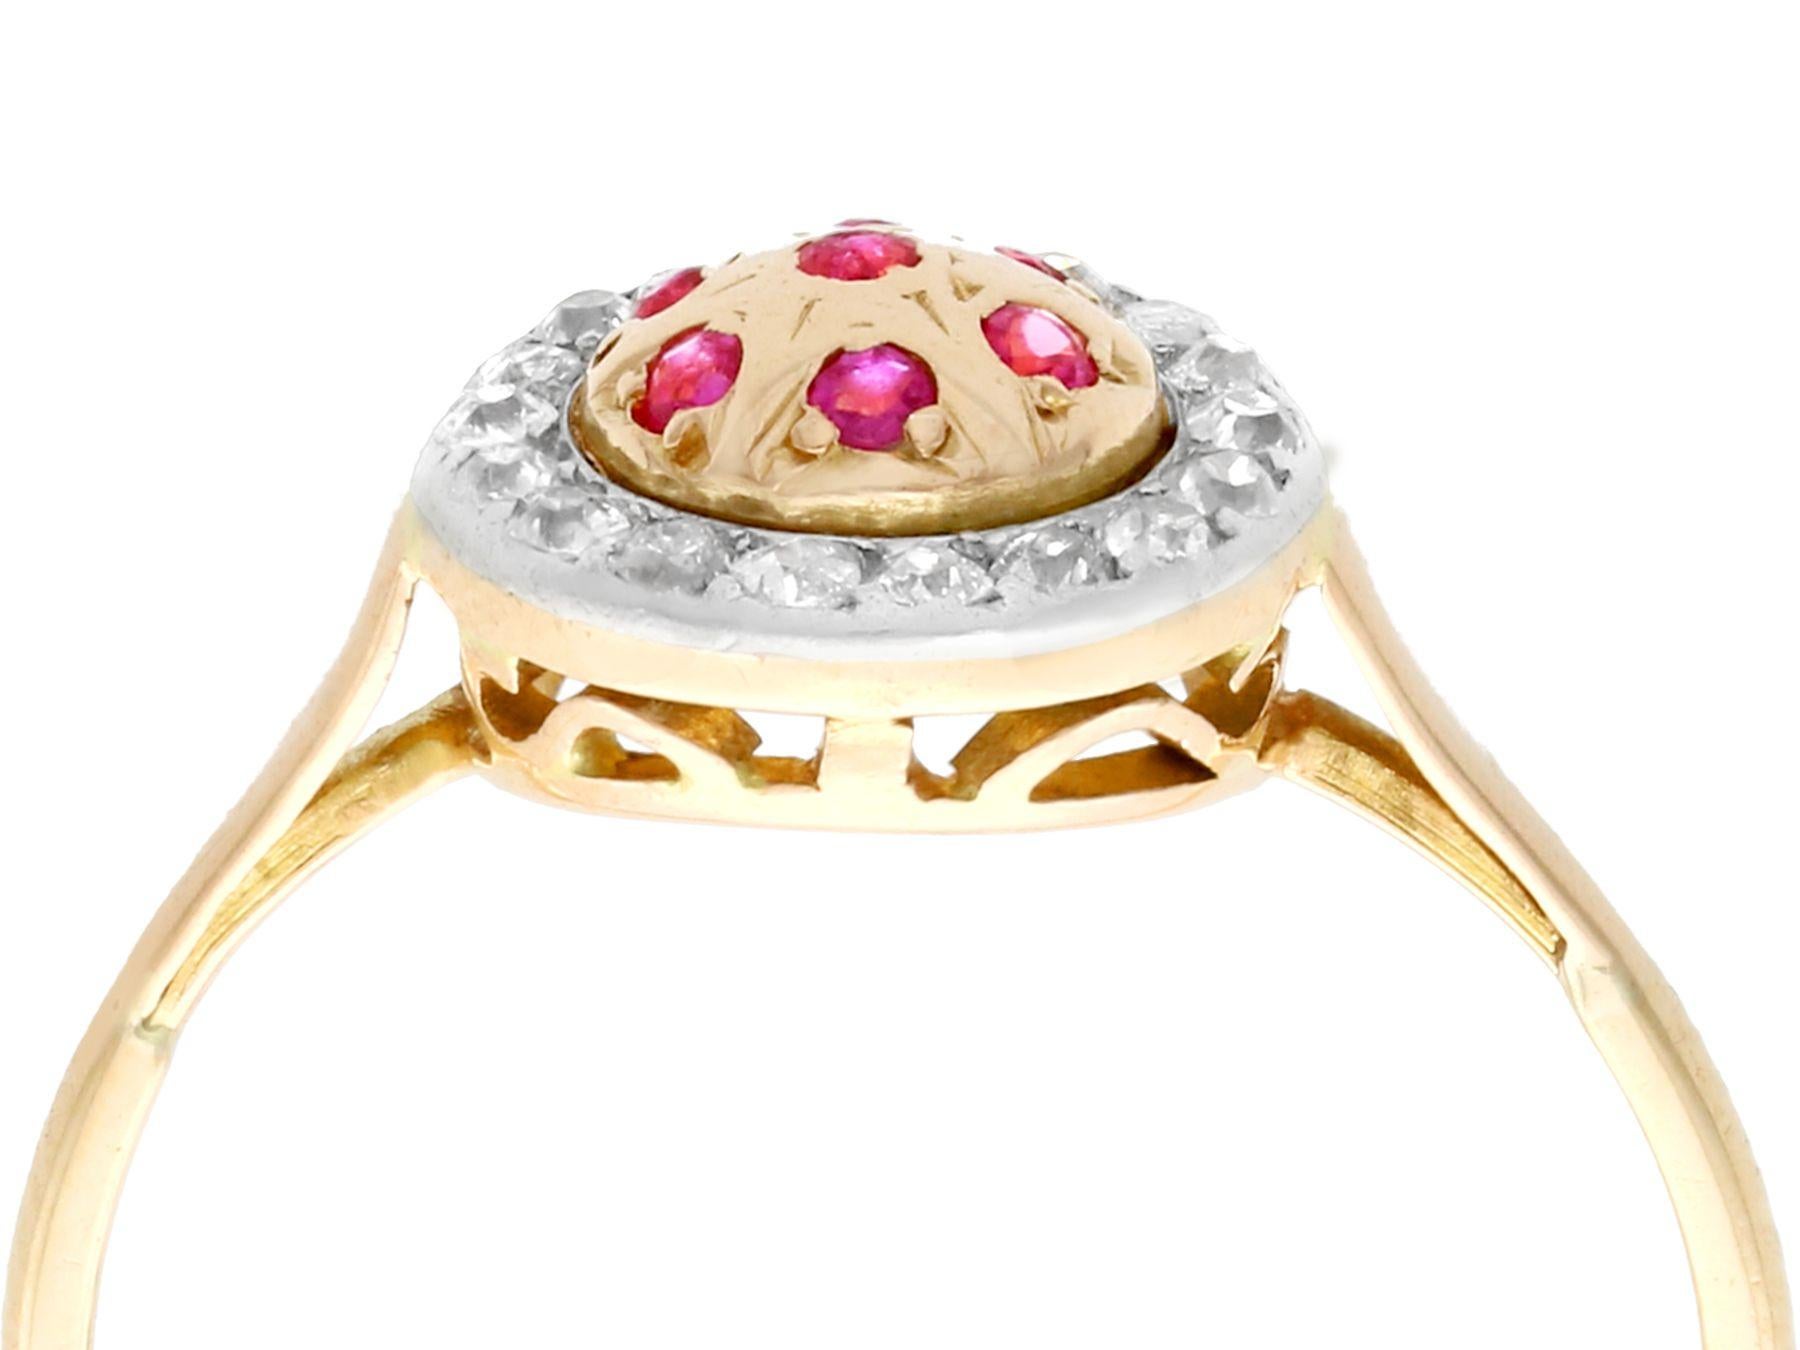 A fine 0.15 carat ruby and 0.30 carat diamond, 18 karat yellow gold and 18 karat white gold set cocktail ring; part of our diverse vintage jewelry collections.

This fine and impressive ruby and diamond cocktail ring has been crafted in 18k yellow